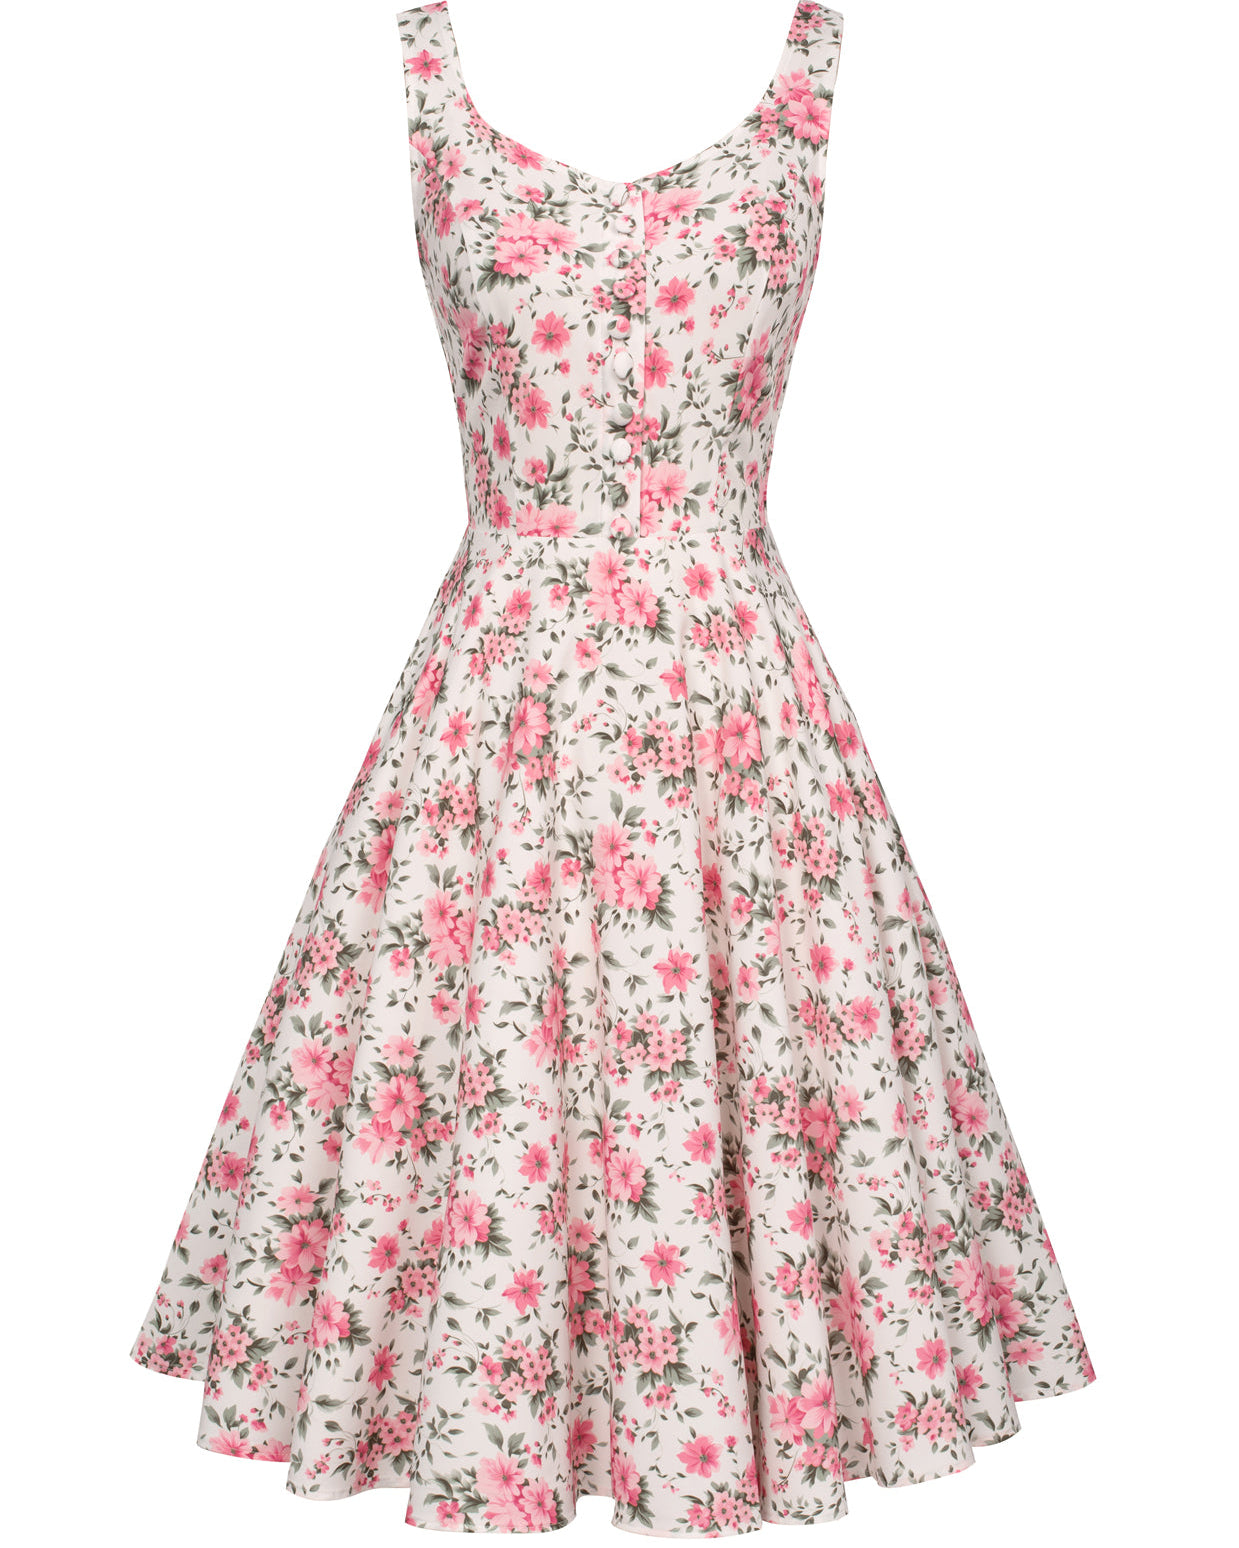 1950s Retro Vintage Floral Patterns Sleeveless Homecoming Dresses